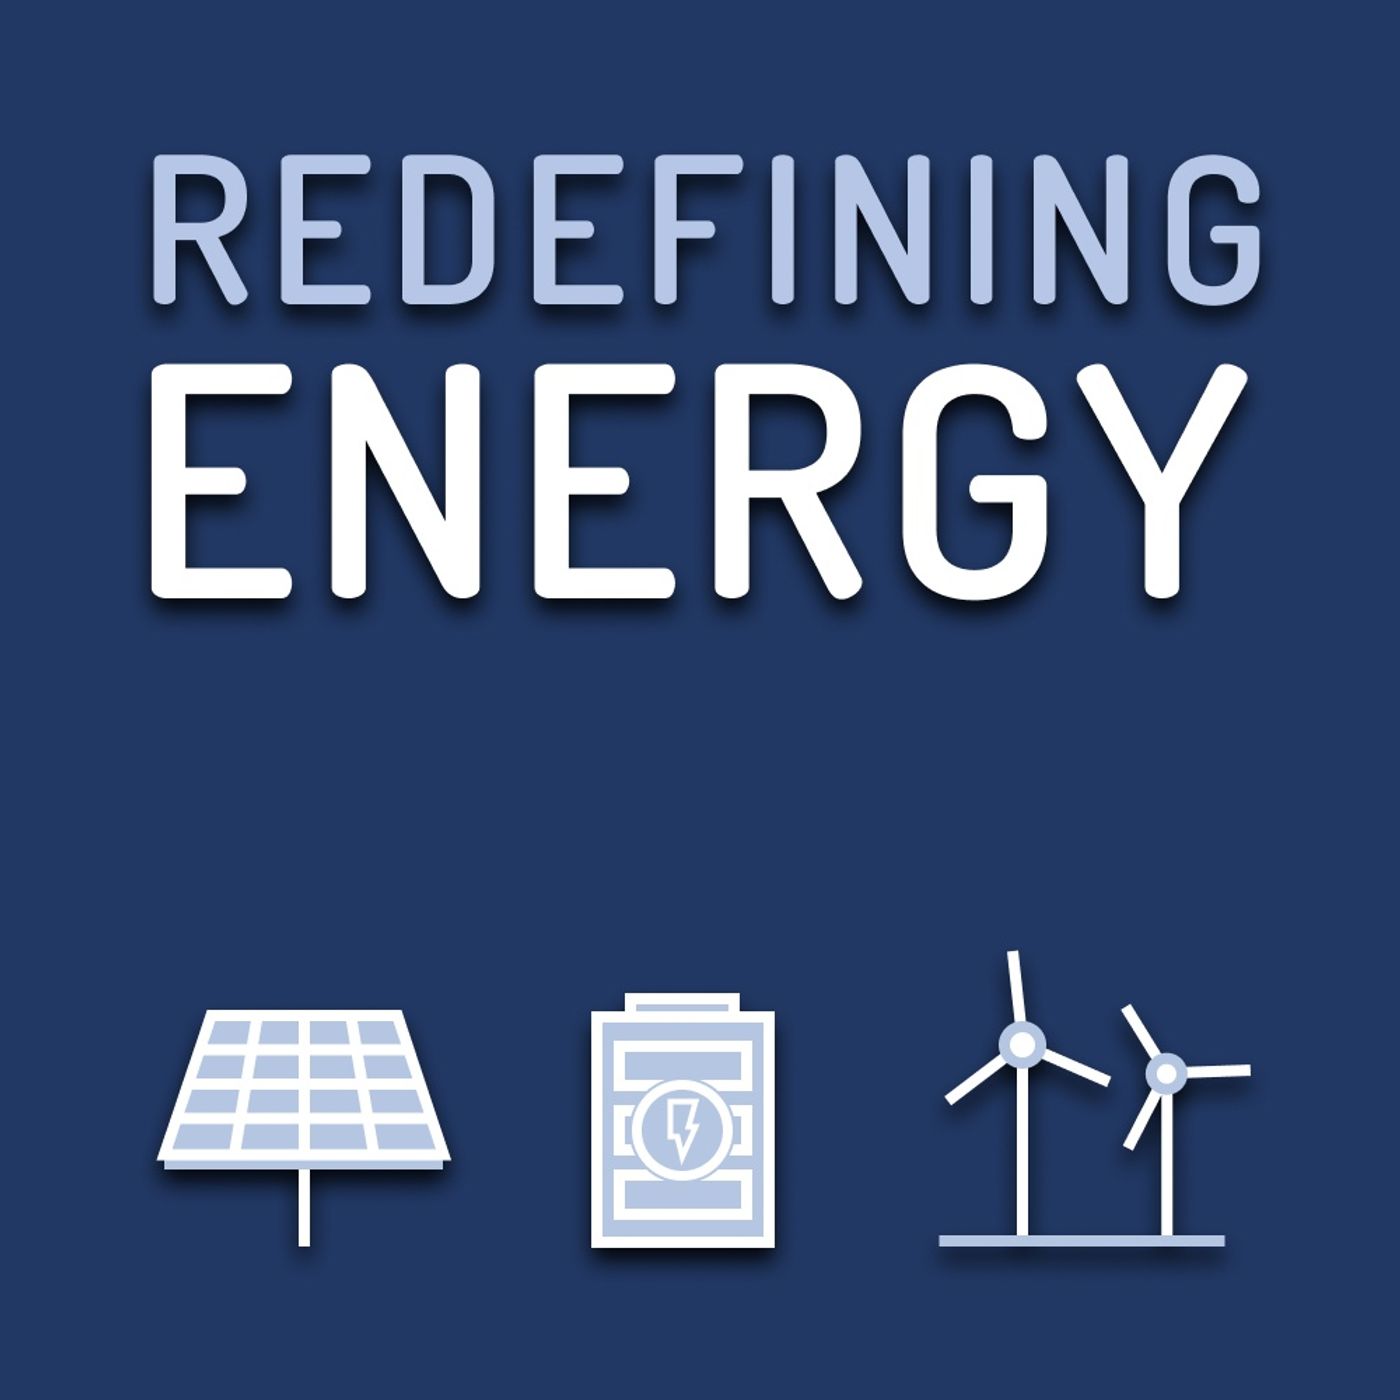 138. Minutes: The Energy Institute’s Statistical Review of World Energy